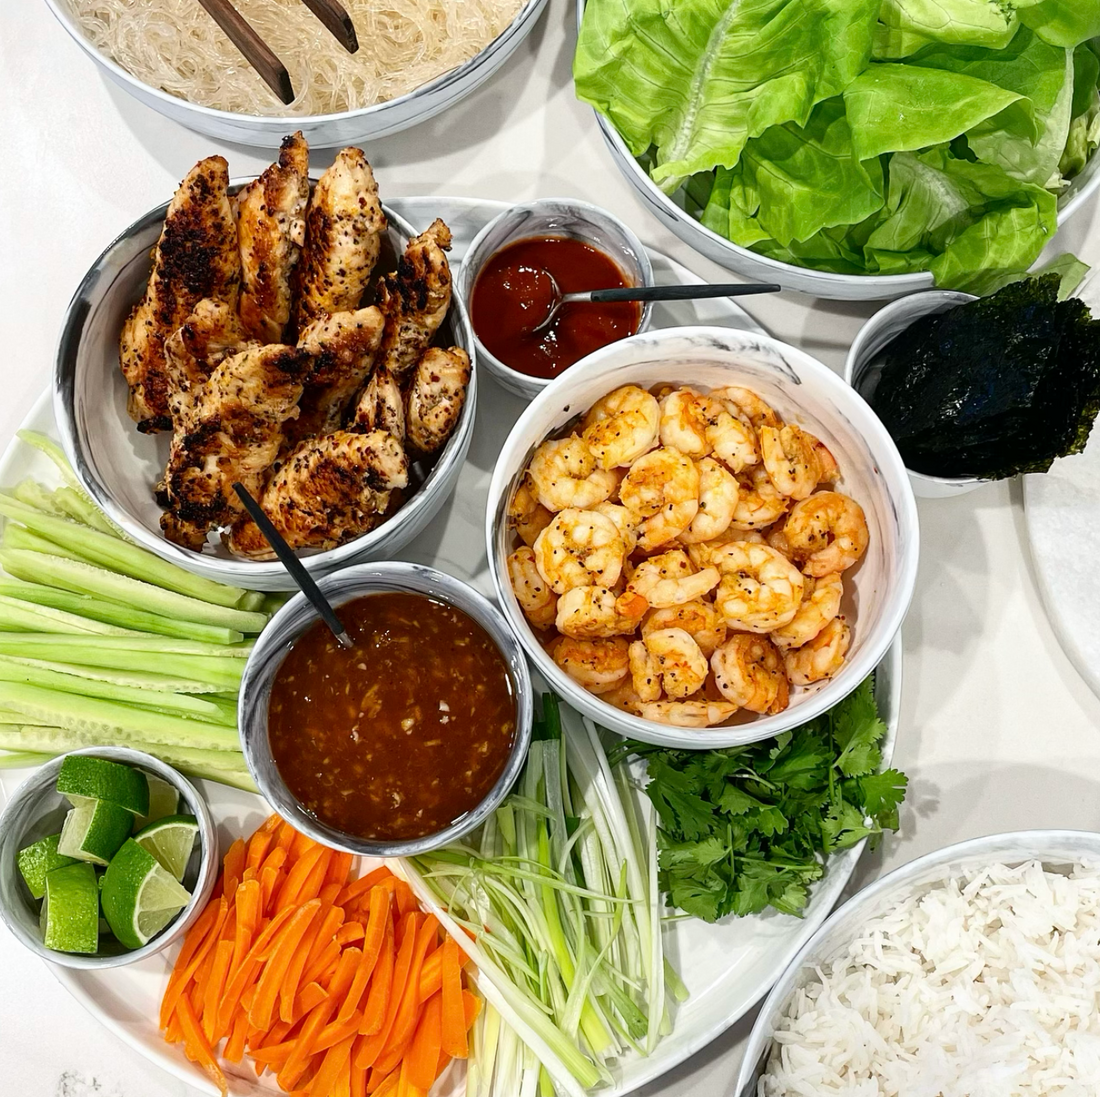 Clean and Zesty Lettuce Wraps with Homemade Duck Sauce